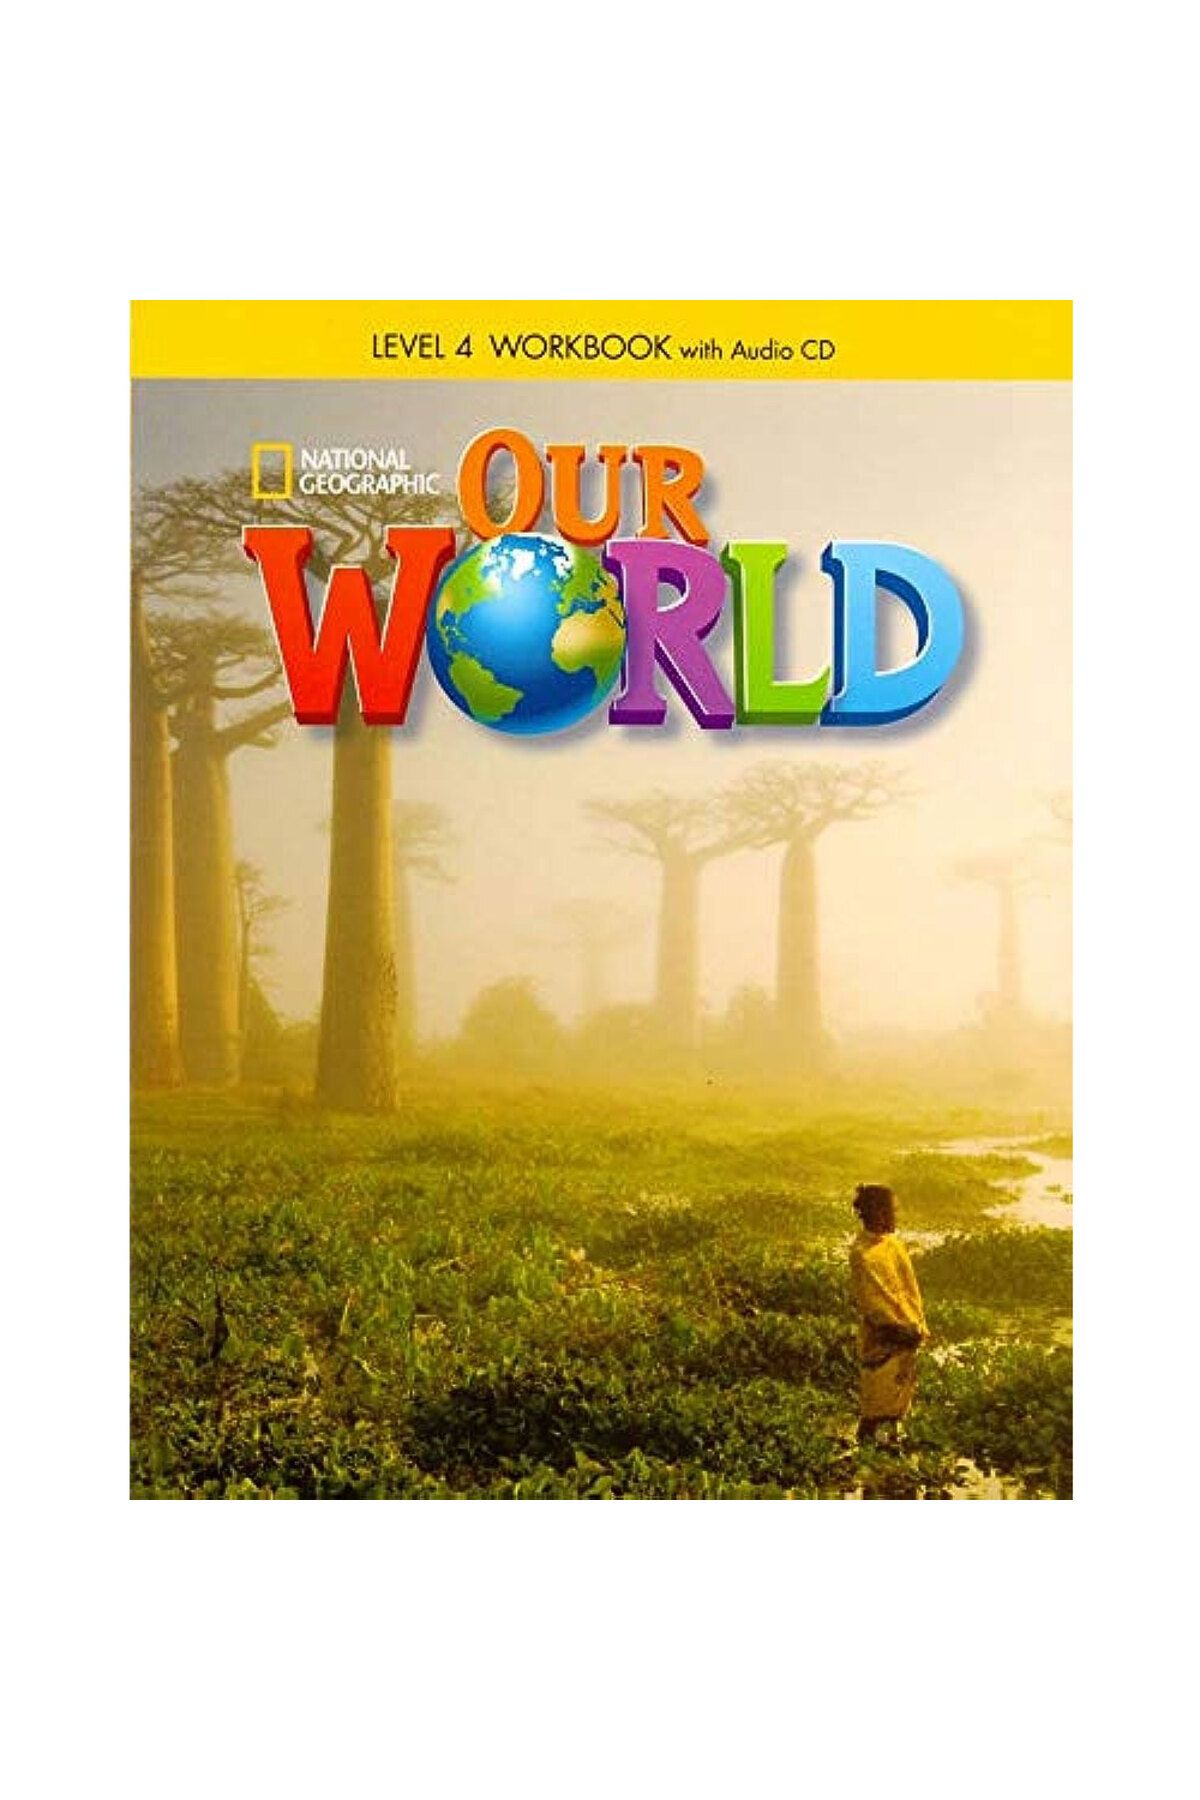 National Geographic Our World 4 First Edition Workbook + Audio Cd-rom